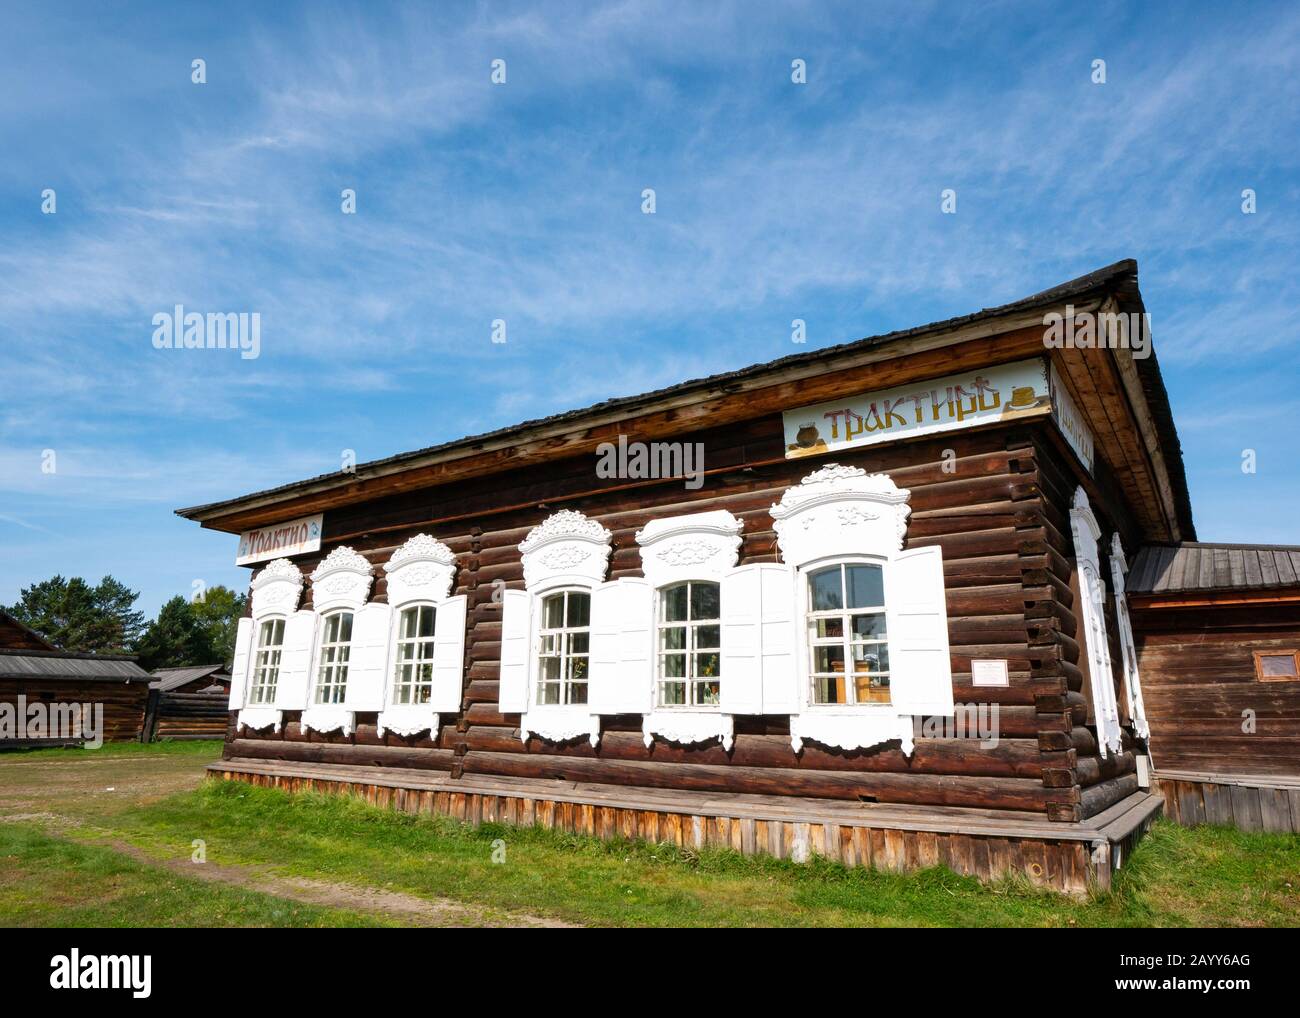 Old fashioned log cabin with window shutters, Taltsy Museum of Wooden Architecture, Irkutsk Region, Siberia, Russia Stock Photo